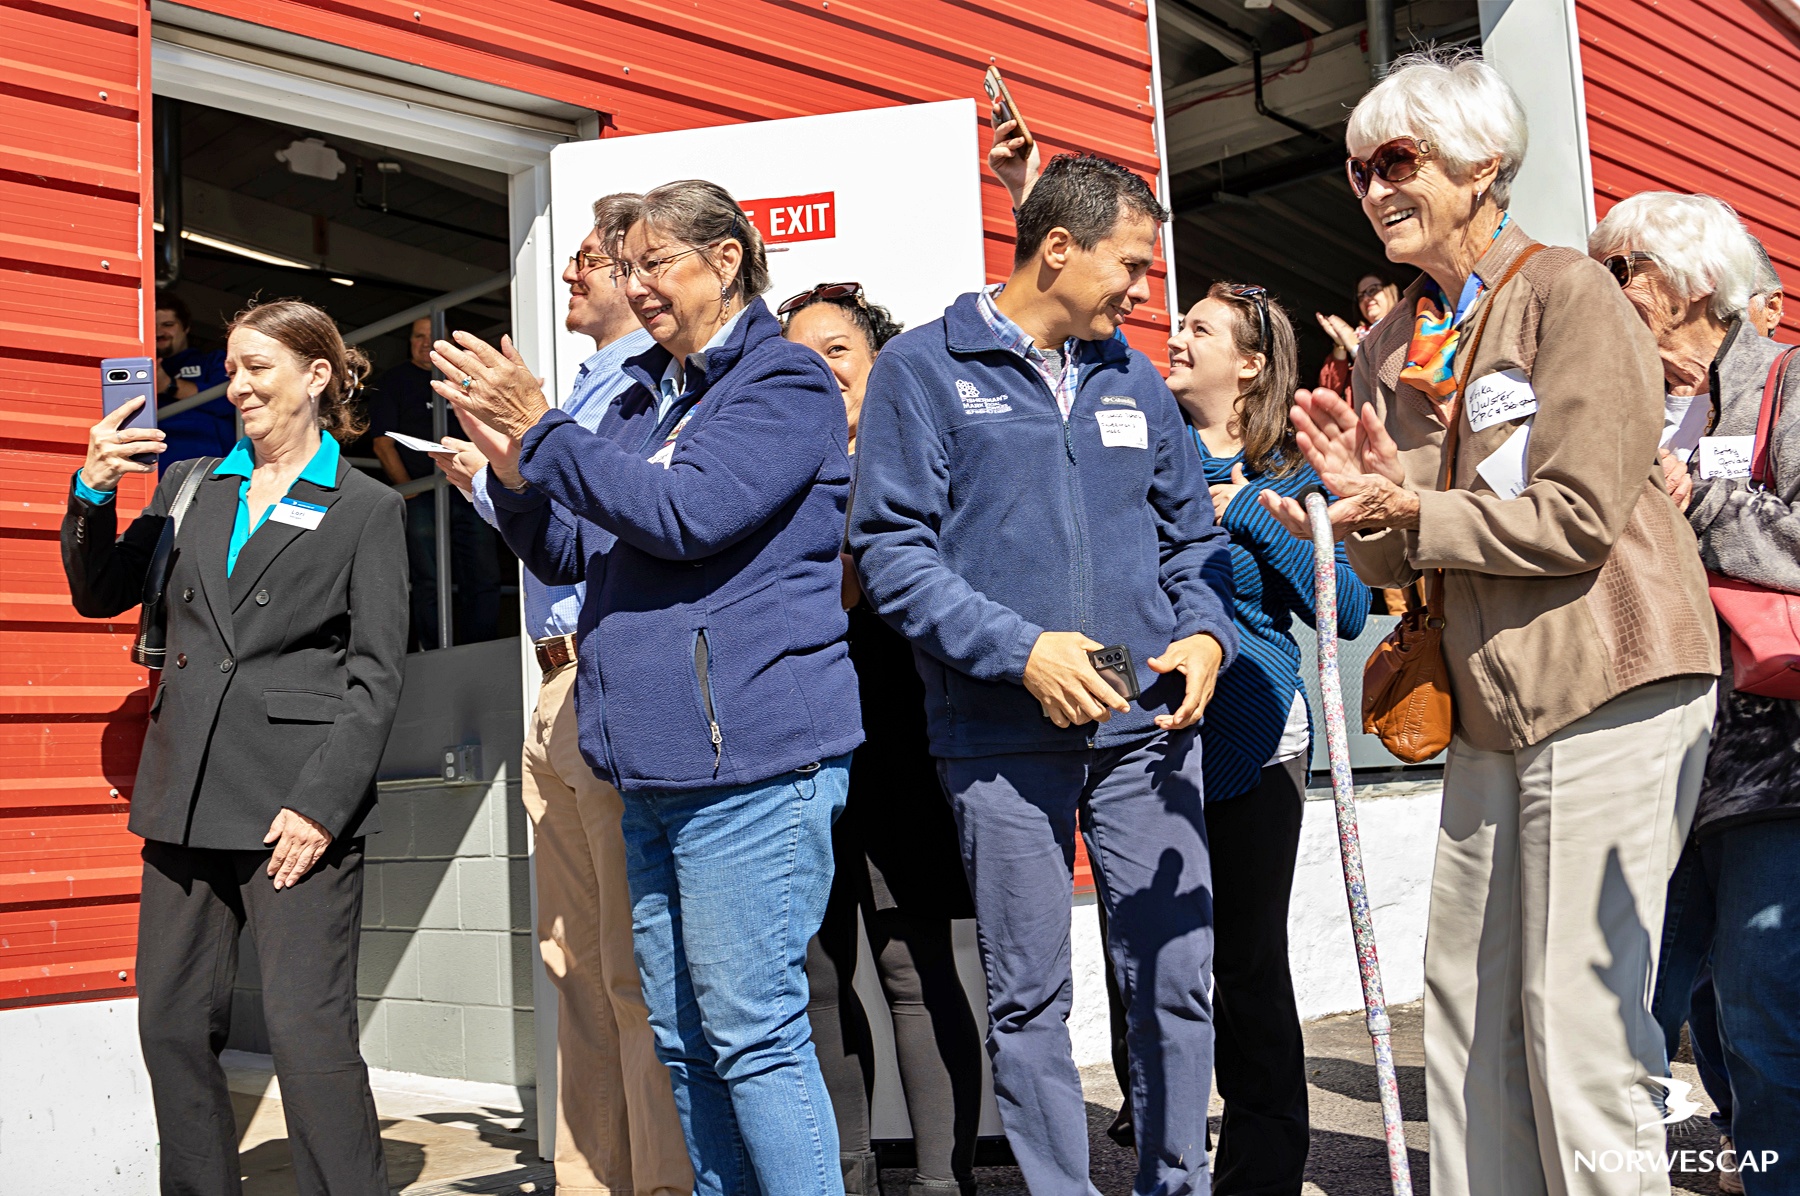 The culmination of the ceremony was the cutting of the bright blue ribbon that adorned the entrance to the Annex. Dignitaries lined up, and as Mark Valli cut the ribbon, there was an outpouring of cheers and applause, symbolizing a significant step towards boosting food security in our region. 